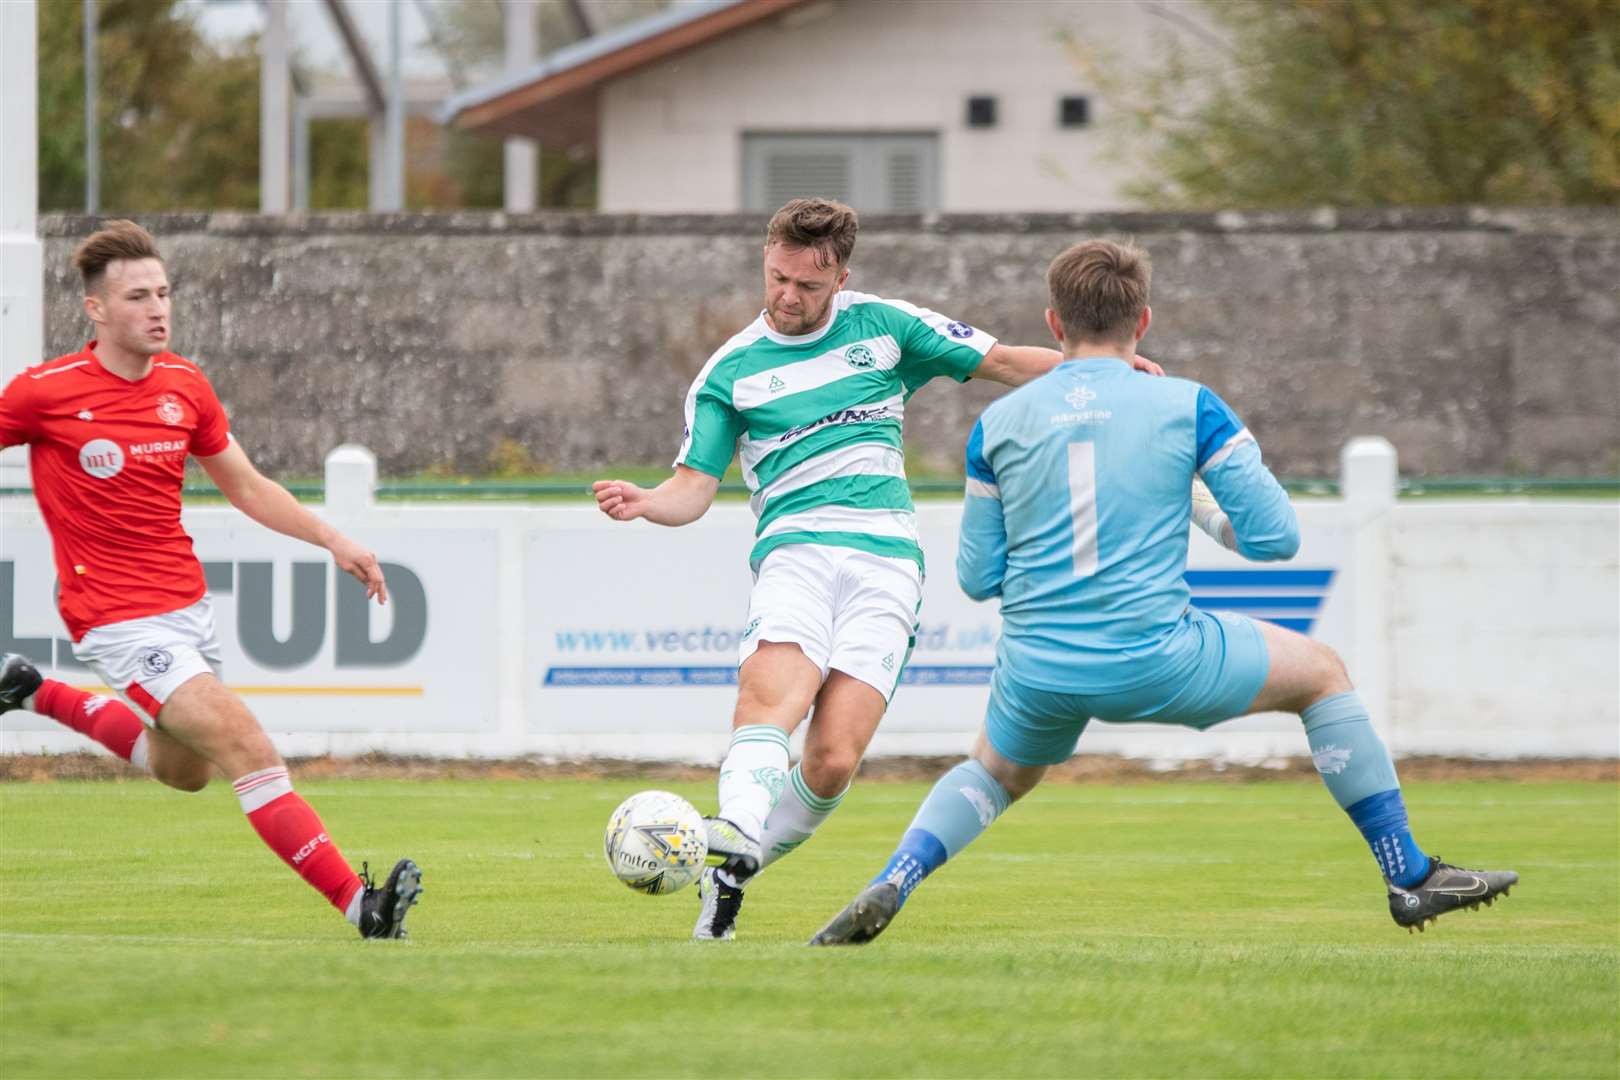 Buckie forward Josh Peters could have had a quick fire double had it not been for a decent save from County goalkeeper Dylan Maclean. ..Buckie Thistle FC (6) vs Nairn County FC (0) - Highland Football League 23/24 - Victoria Park, Buckie 30/09/2023...Picture: Daniel Forsyth..